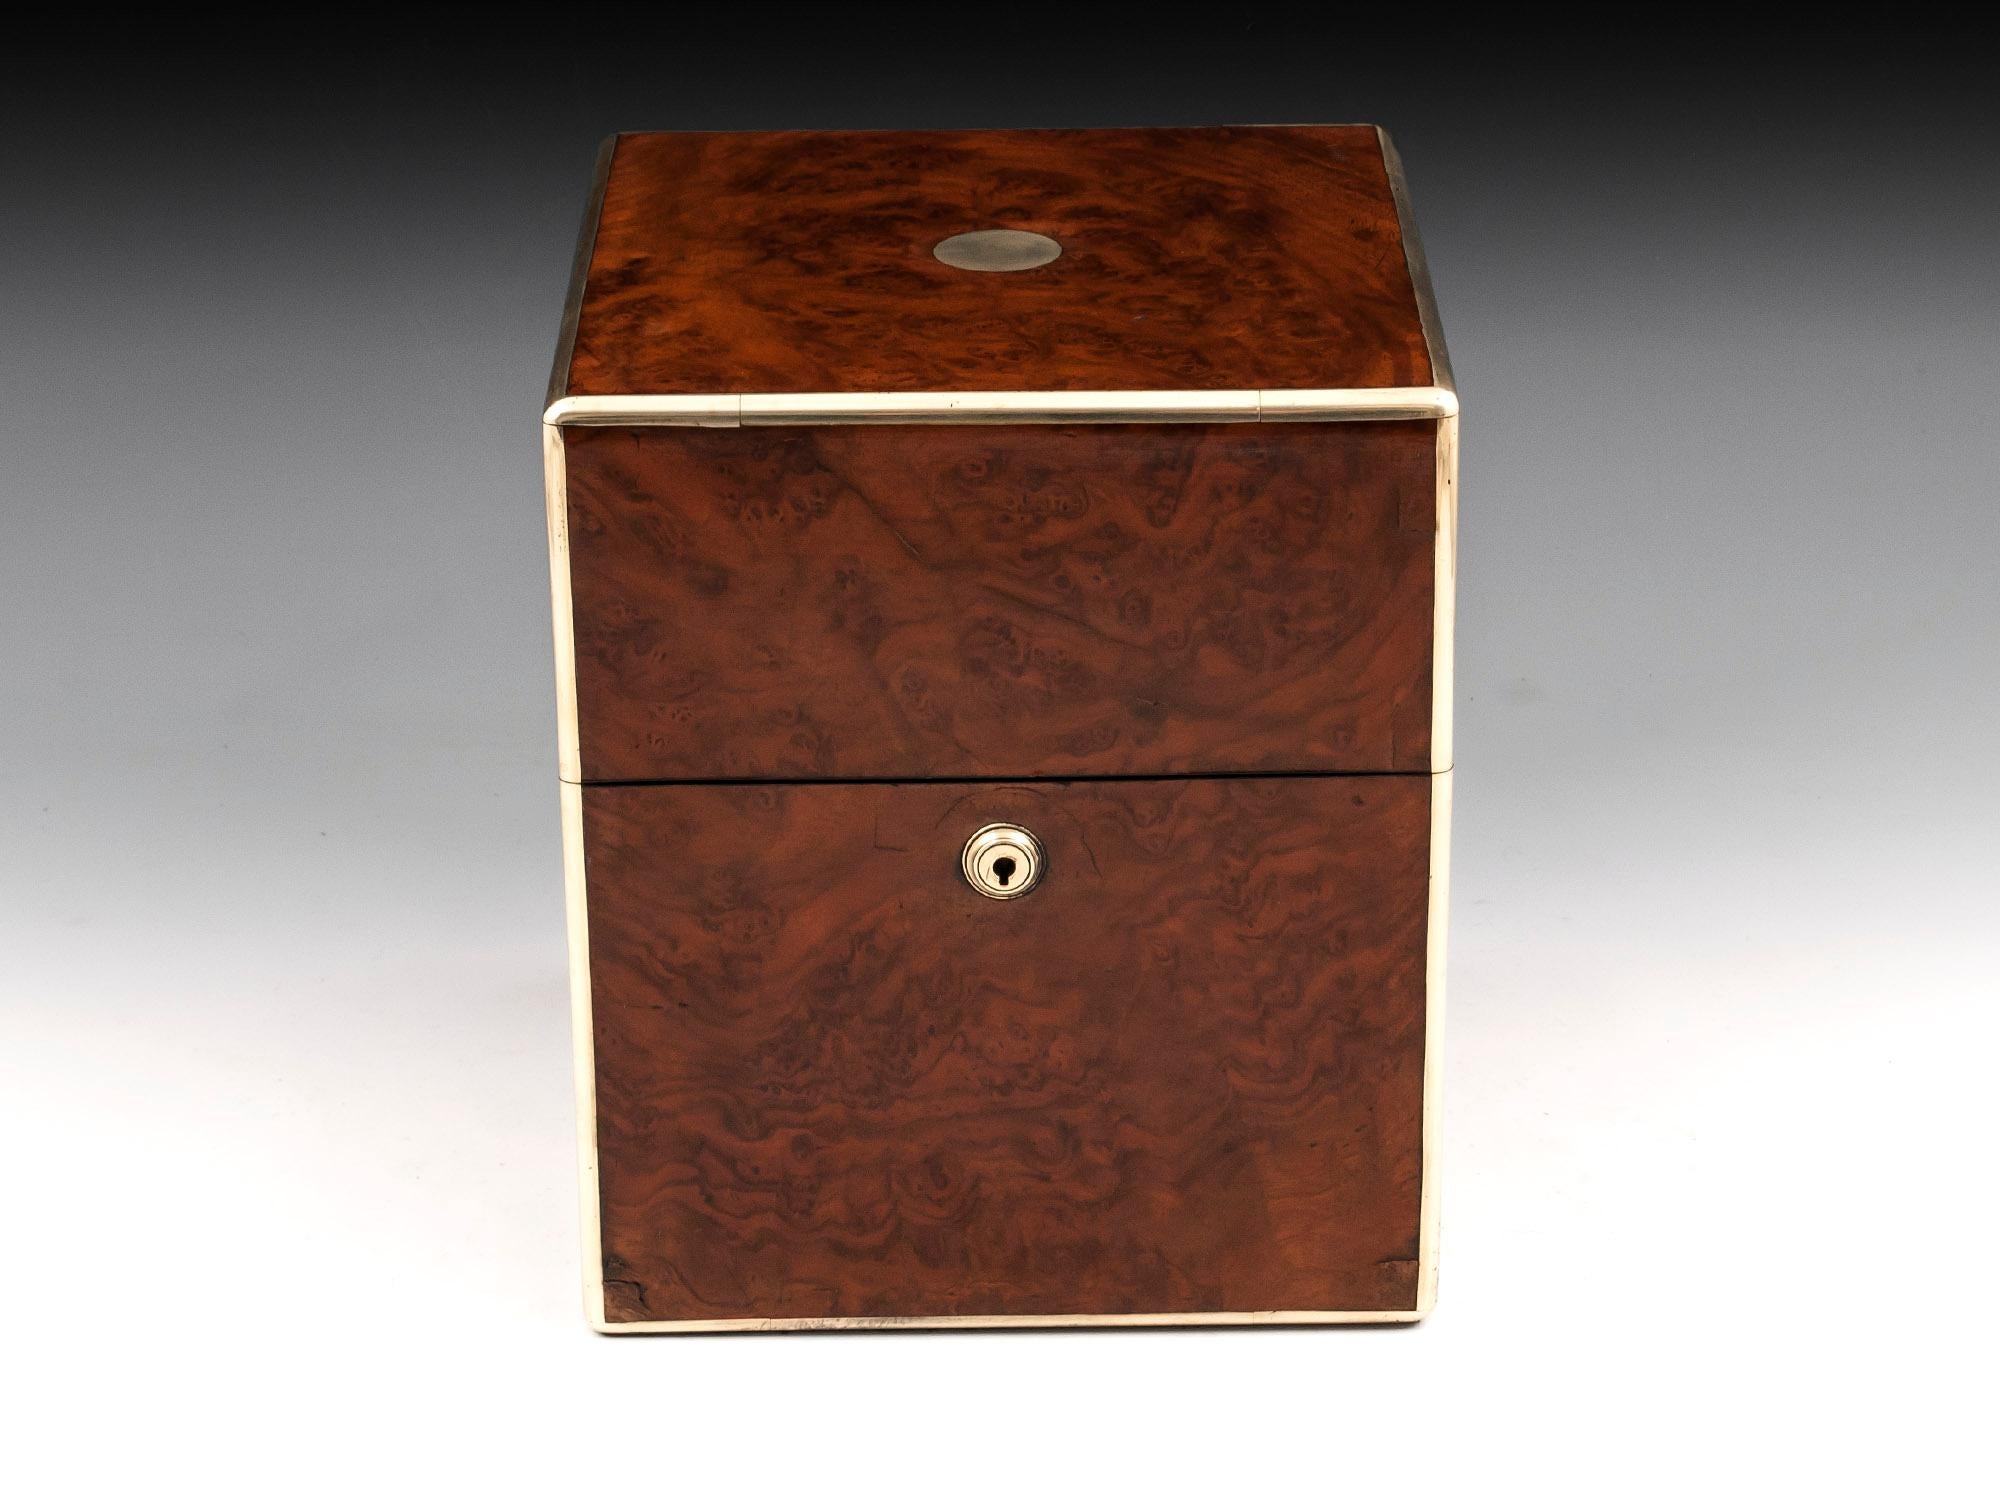 Antique jewelry box veneered in burr walnut, bound in brass edging for added strength. 

Opening this jewelry box reveals a purple velvet lined interior with two removable stacked trays with padded jewelry compartments, with brass and ribbon